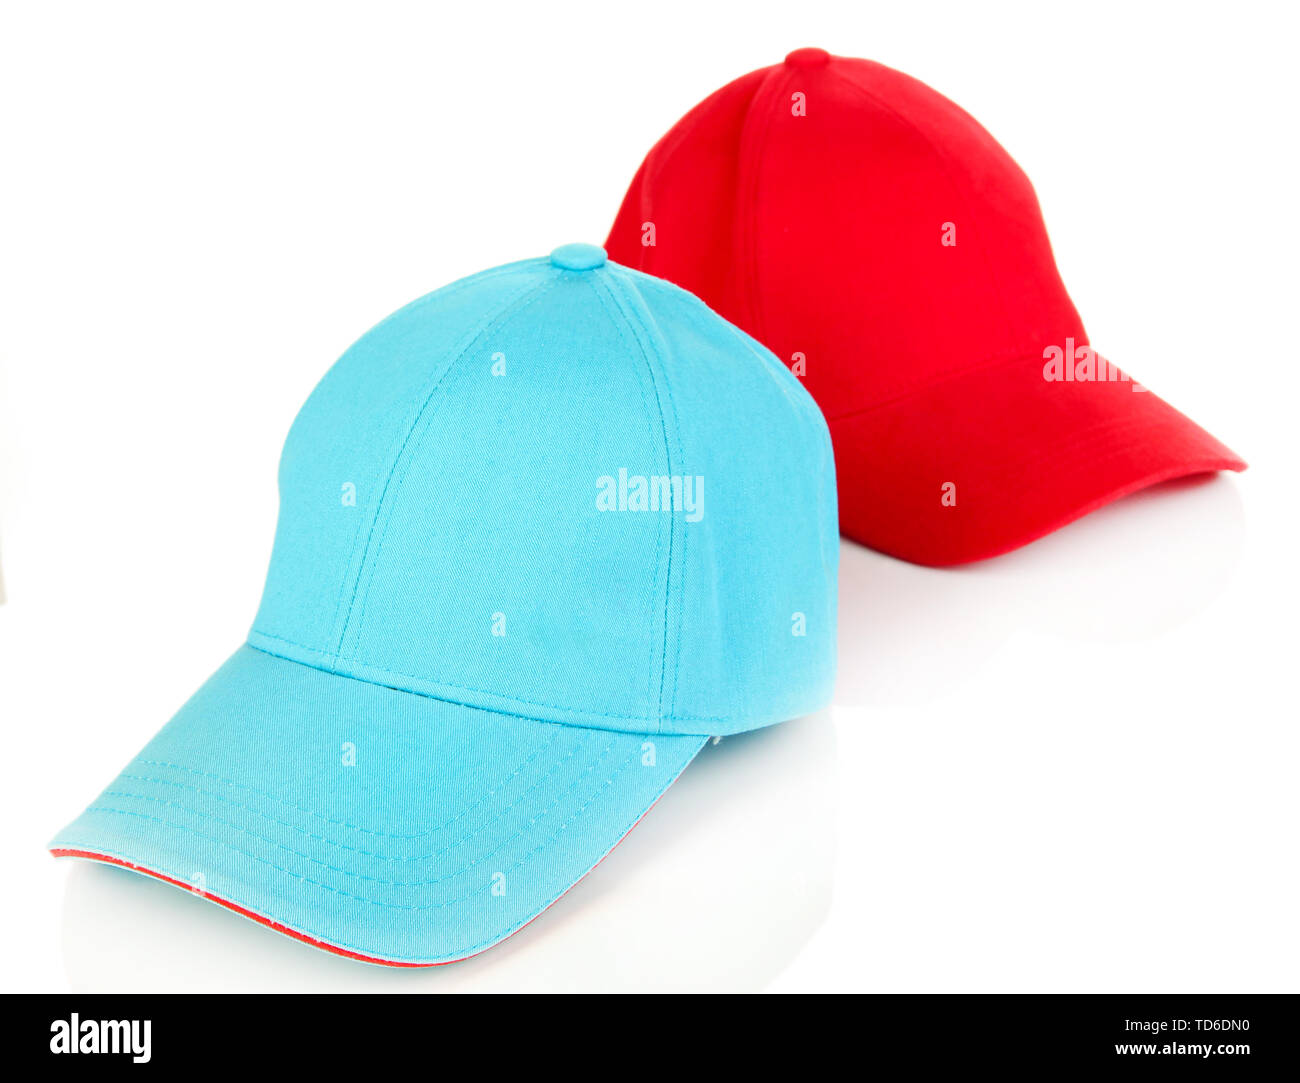 Red and blue caps cap isolated on white Stock Photo